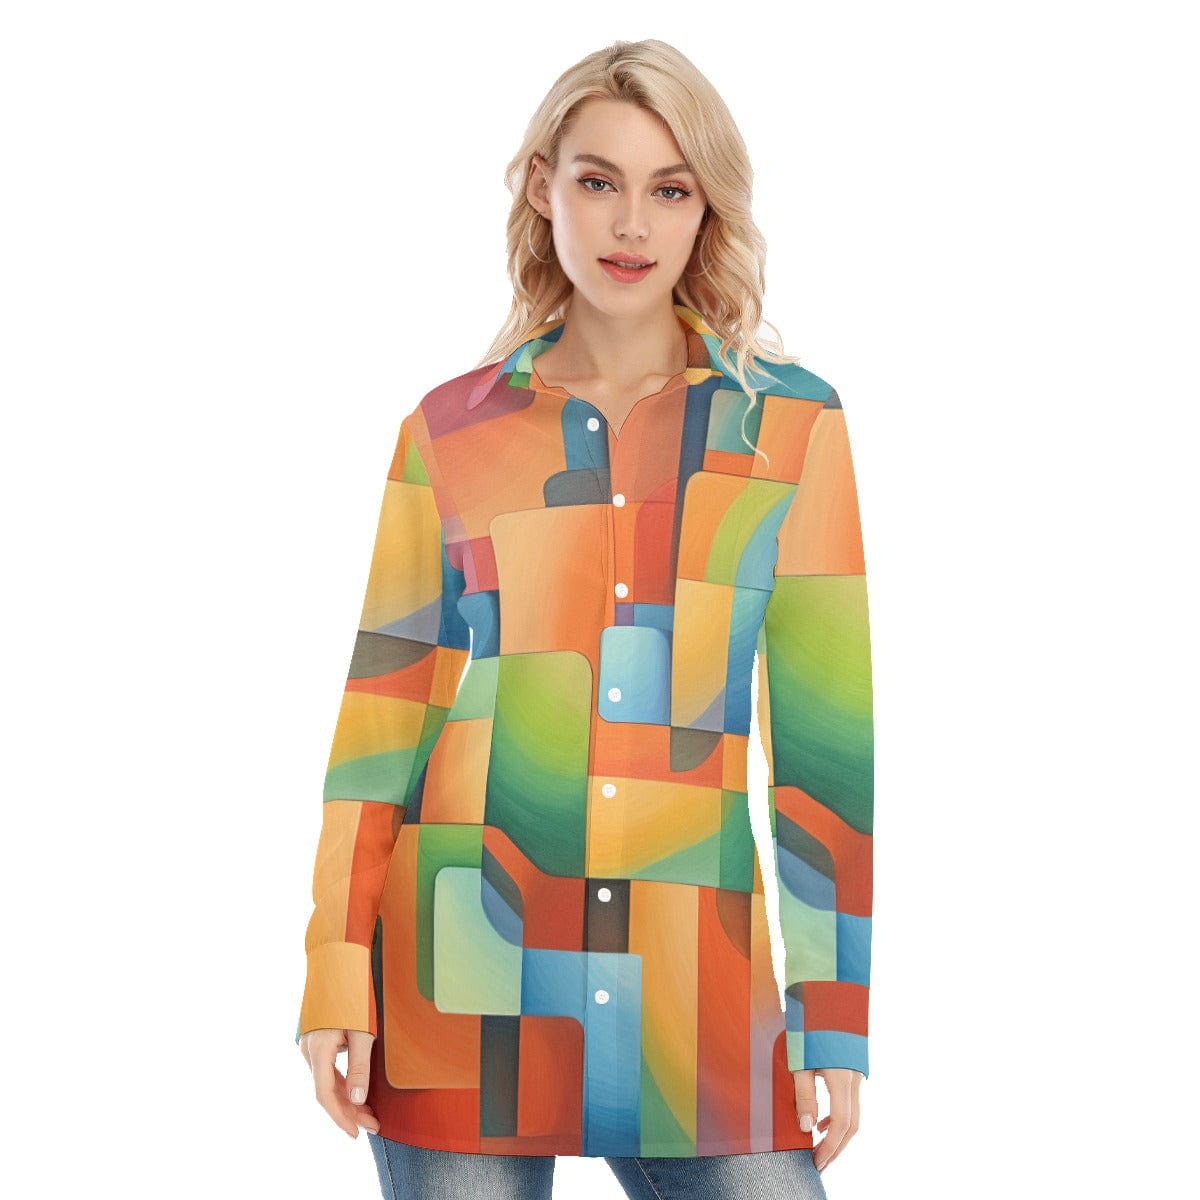 3R9ER All-Over Print Women's Long Shirt |115GSM 98% Cotton and 2% spandex